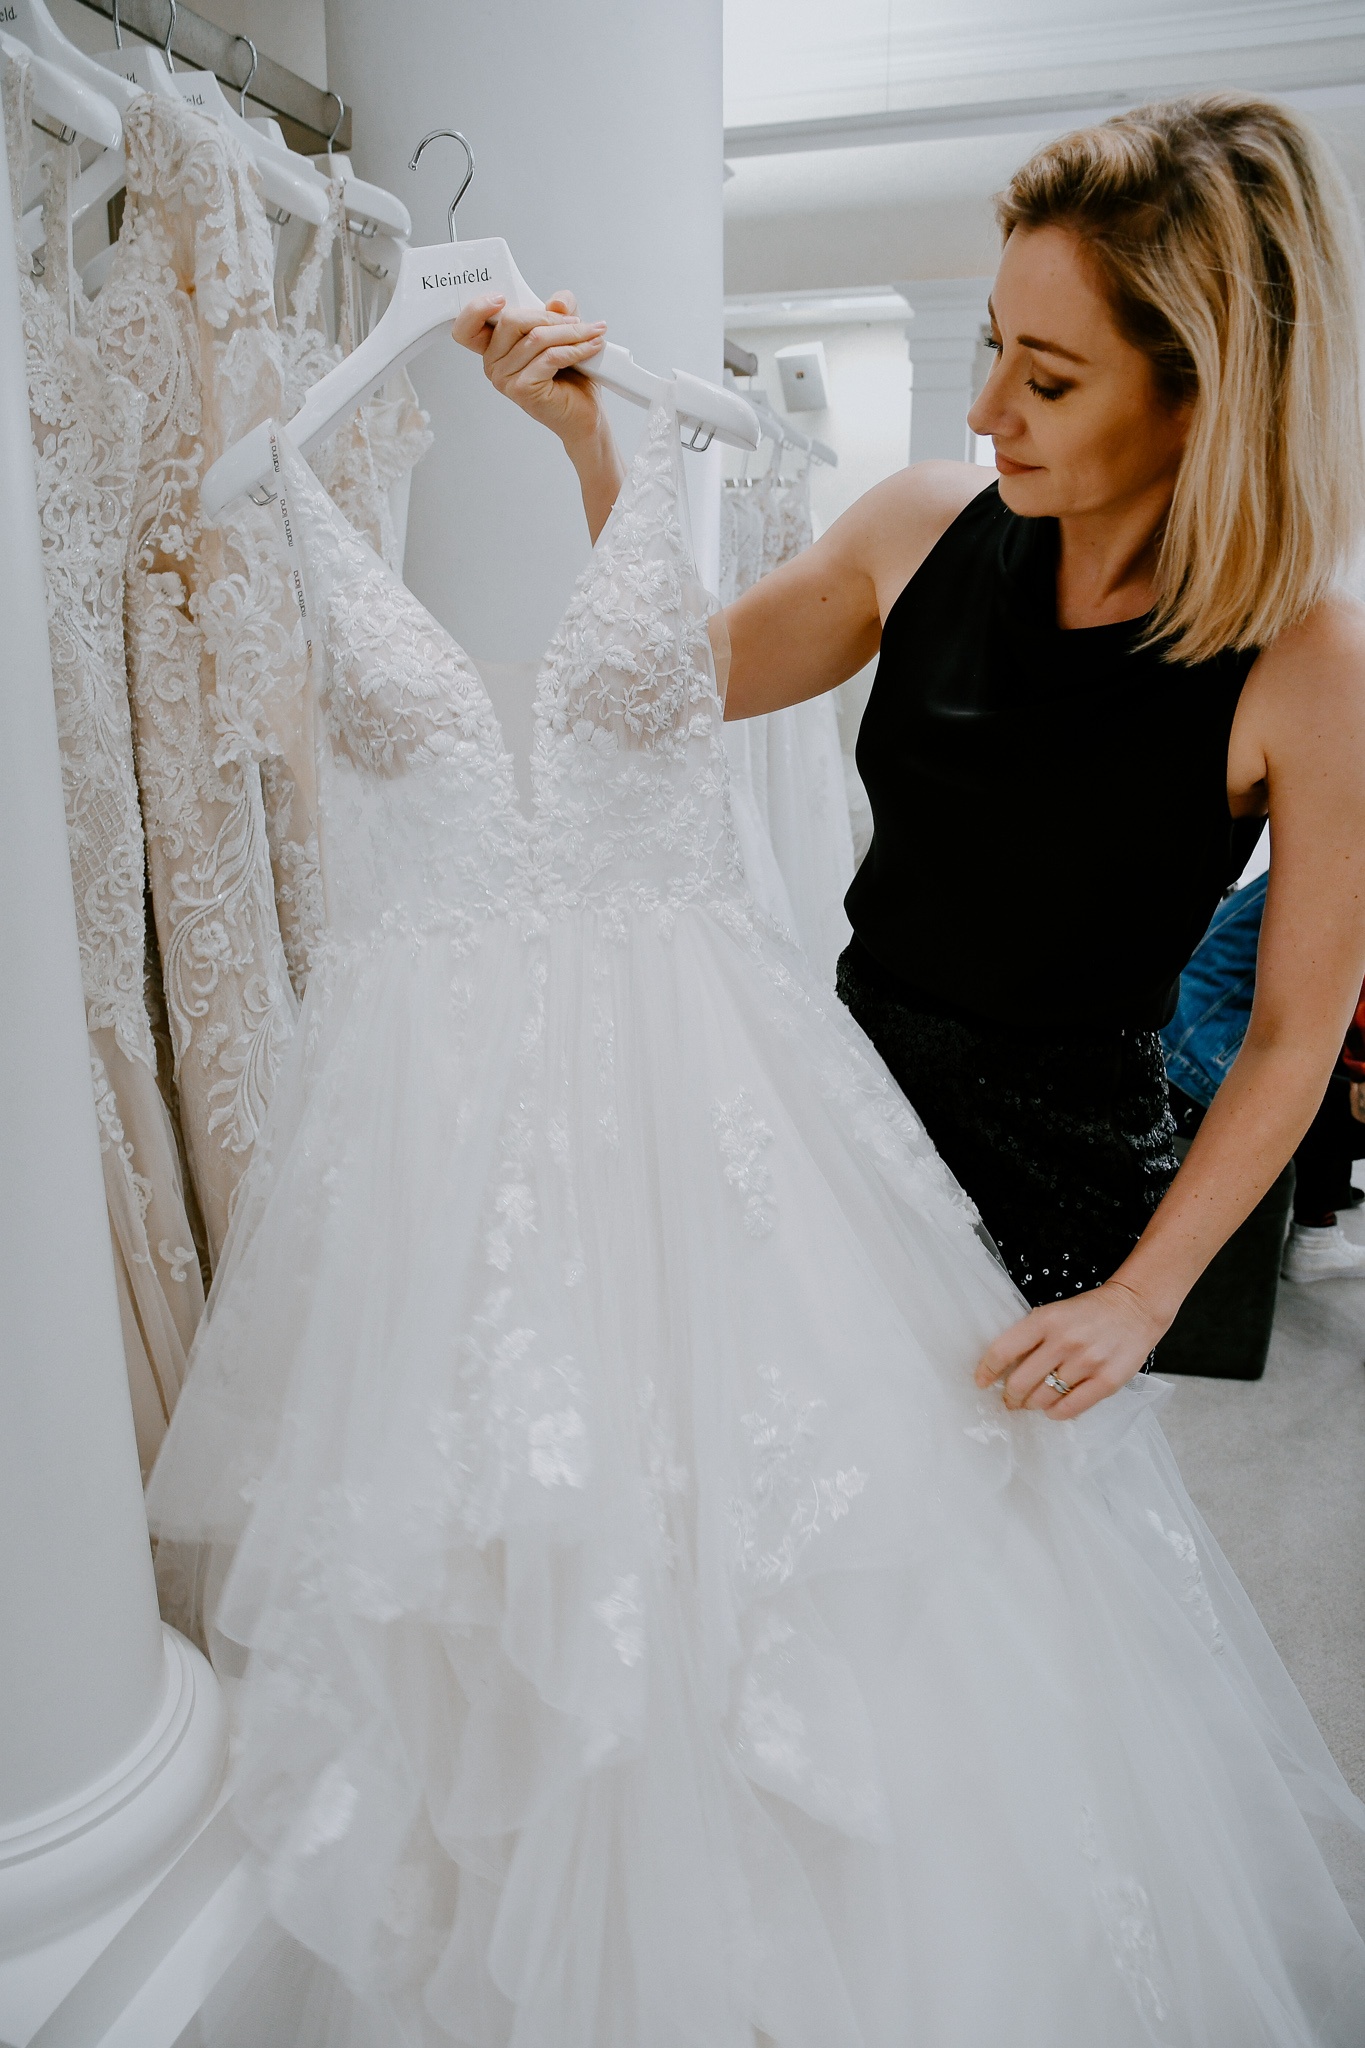 Wedding Dress Customizations Brides Need to Know About | Kleinfeld